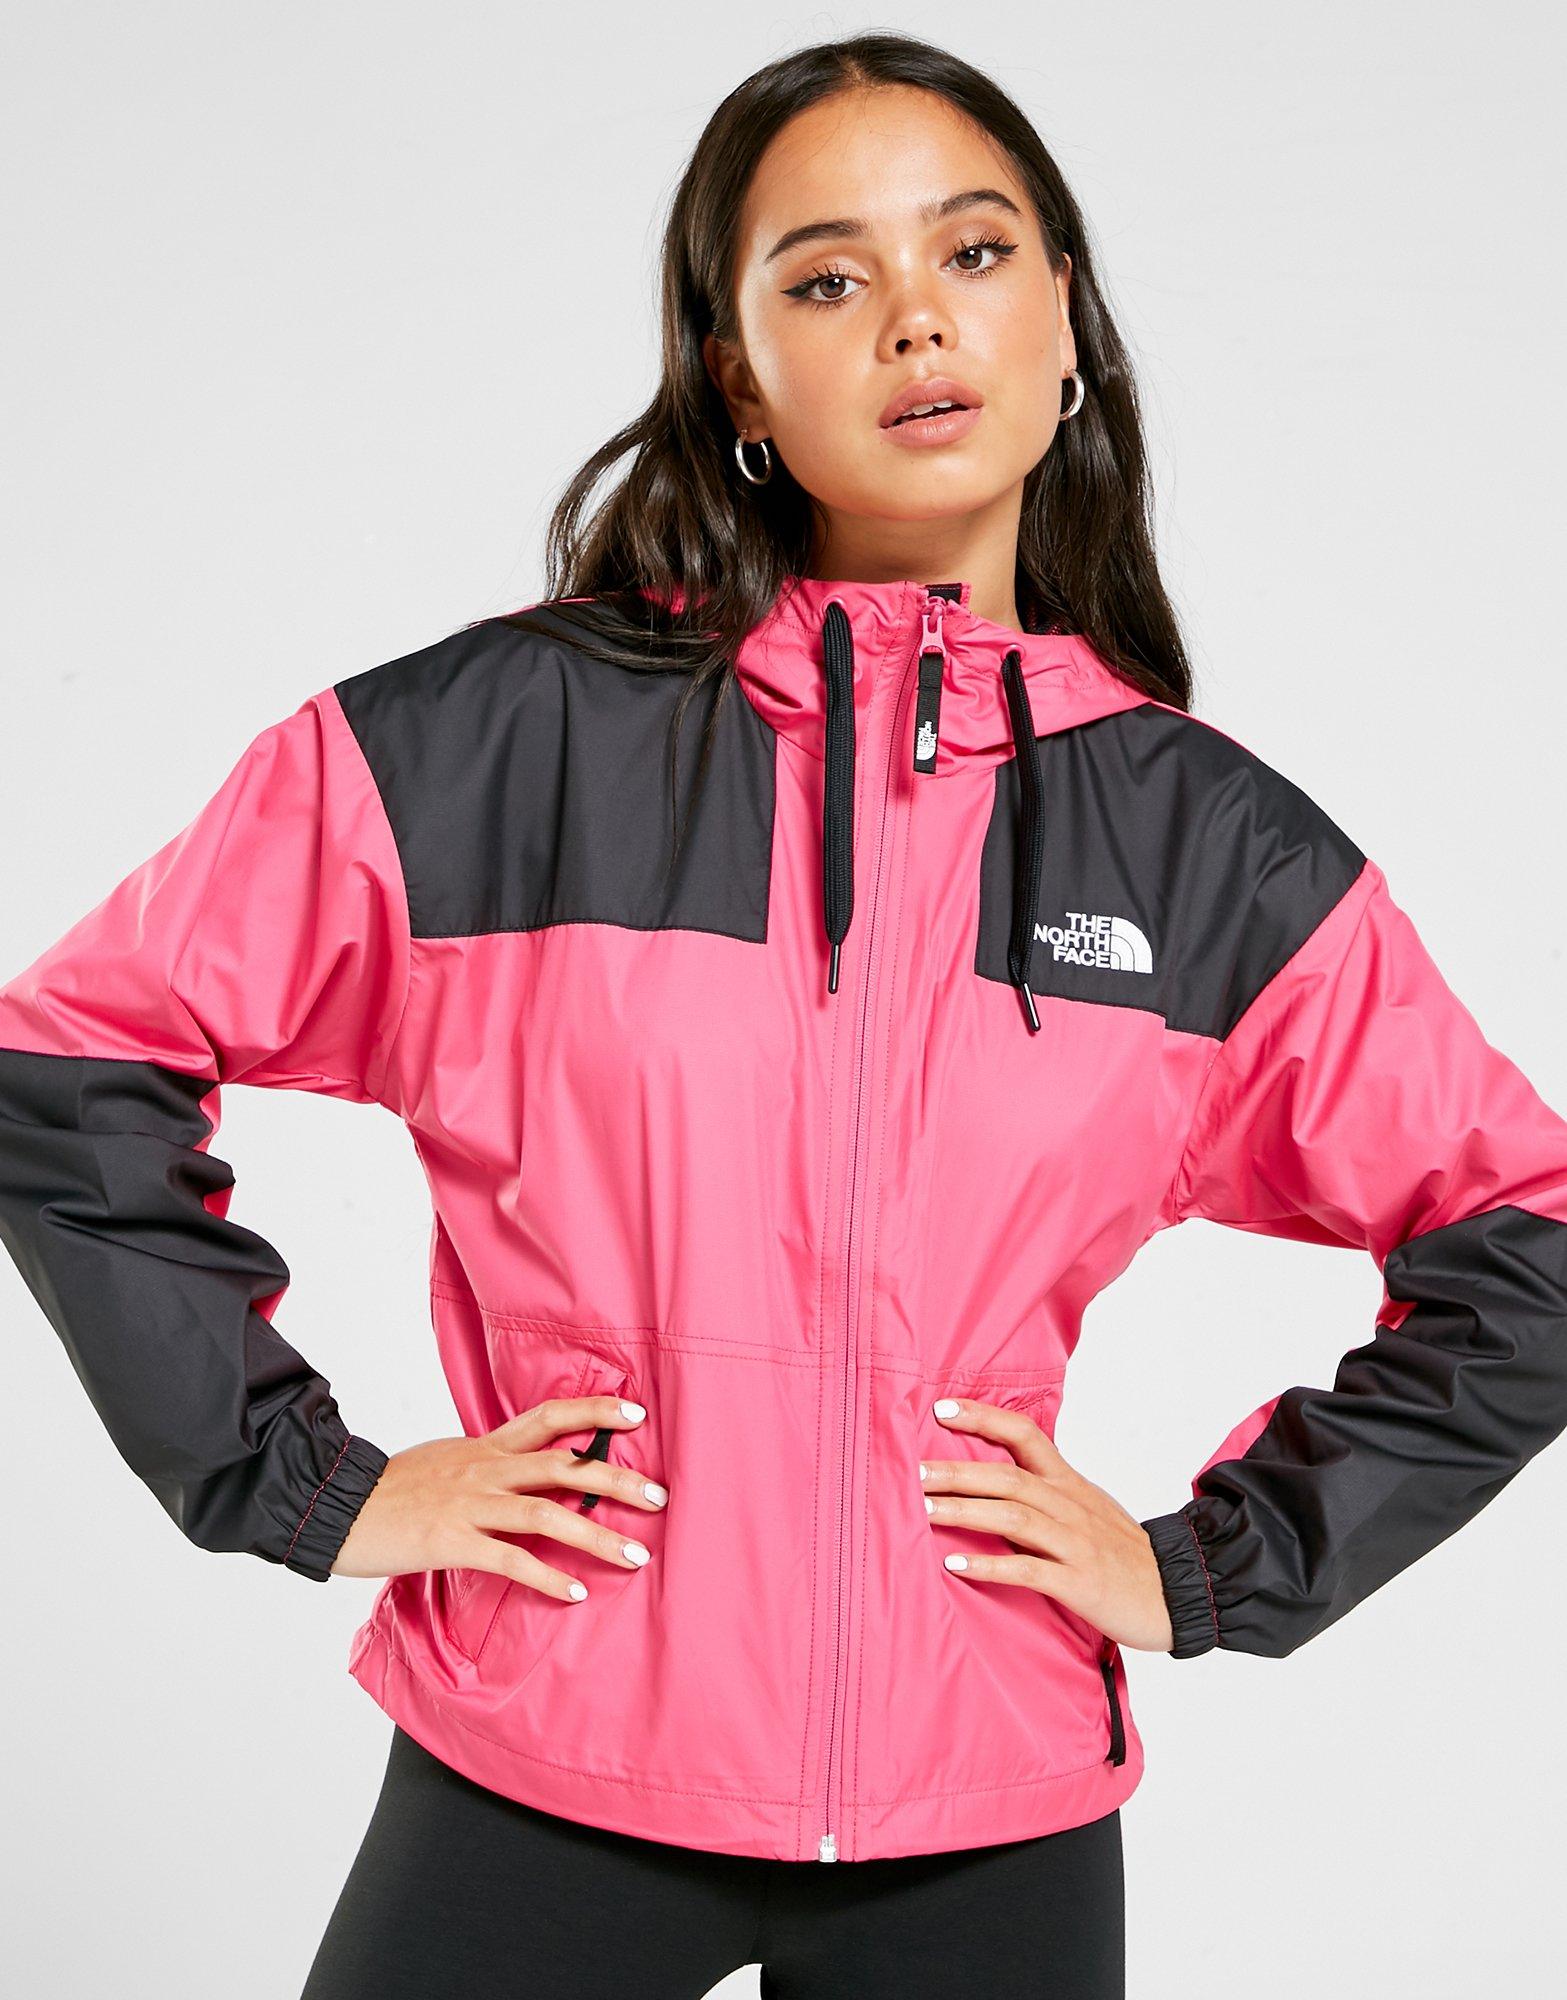 north face women's packable jacket